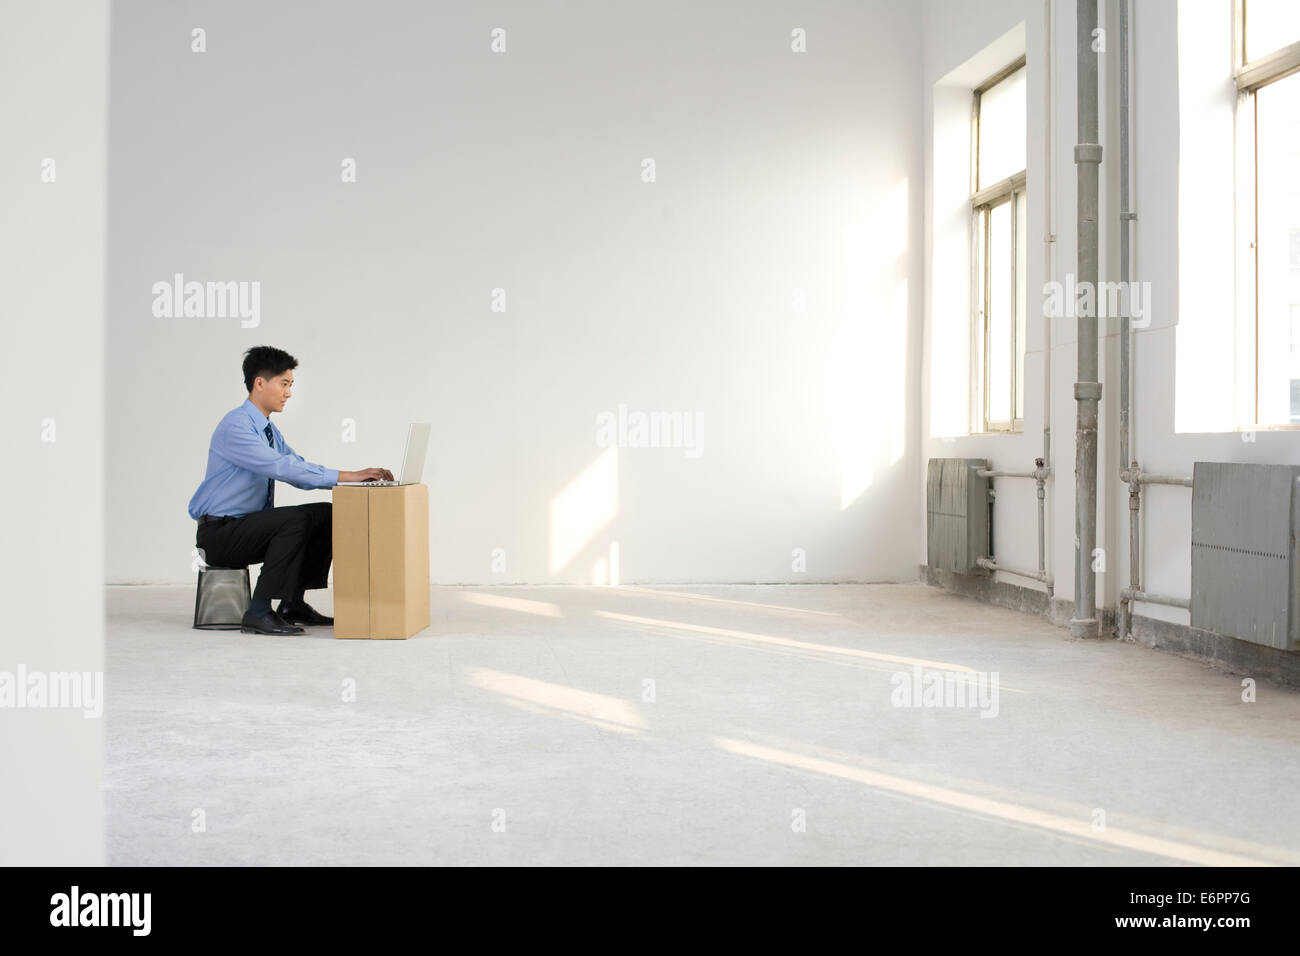 Businessman working in an empty office space Stock Photo